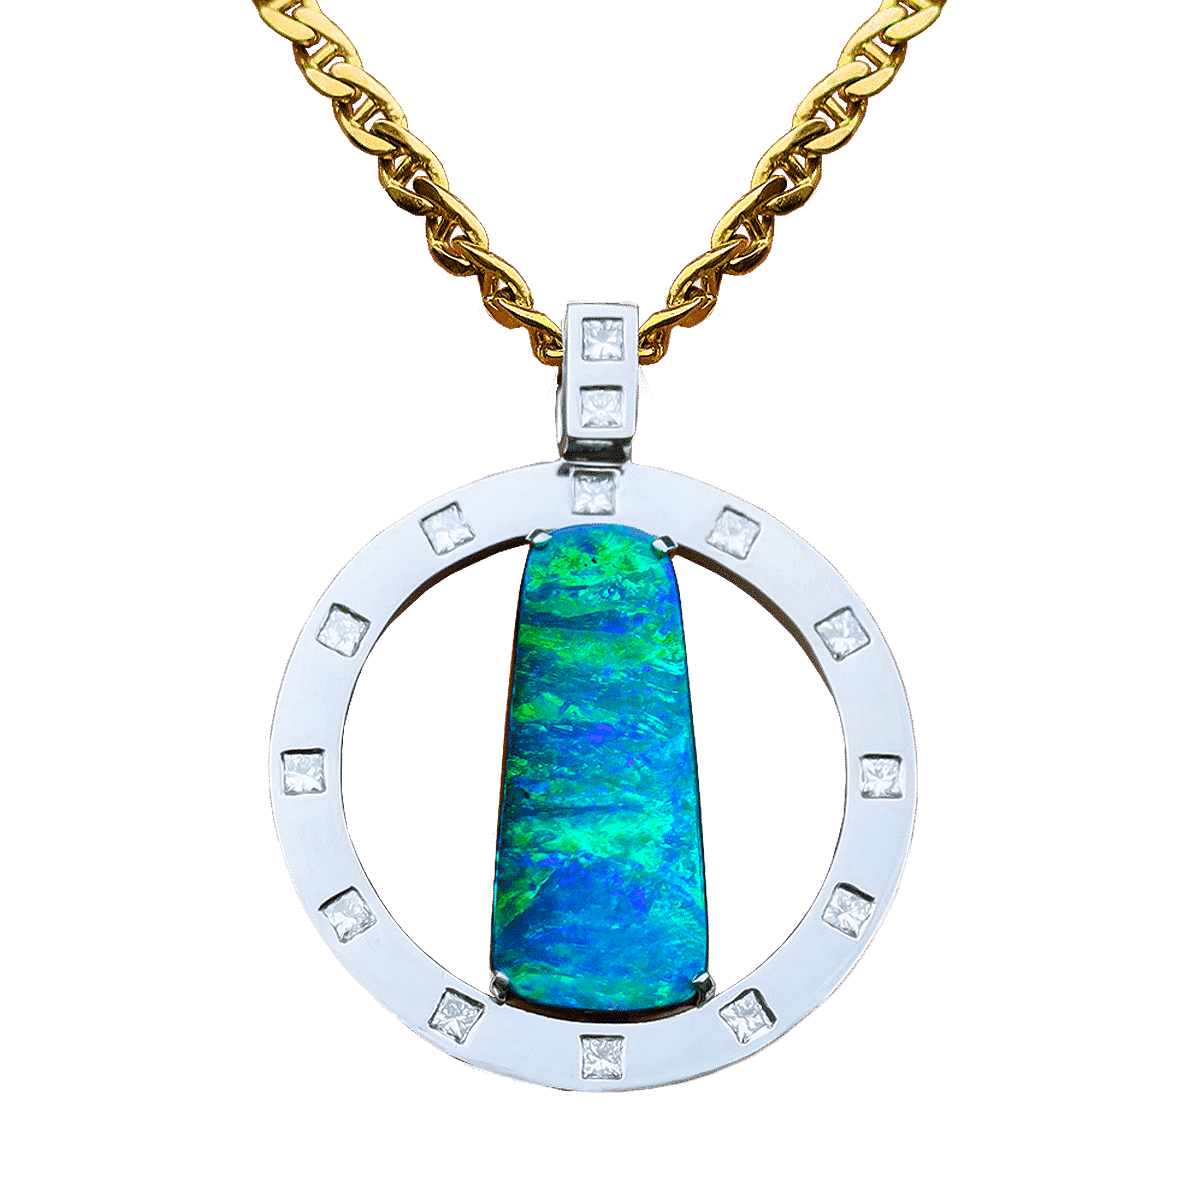 A front on view of an Australian boulder opal pendant on dark blue background. The pendant comprises a large rectangular boulder opal and a flat ring made of platinum. The green-blue boulder opal is set vertically within the ring and held in place by four claws. The platinum ring is decorated by 12 princess cut white diamonds, with equal distances between them. The rectangular bail is attached to the top of the ring and is embellished with 2 more princess cut diamonds.